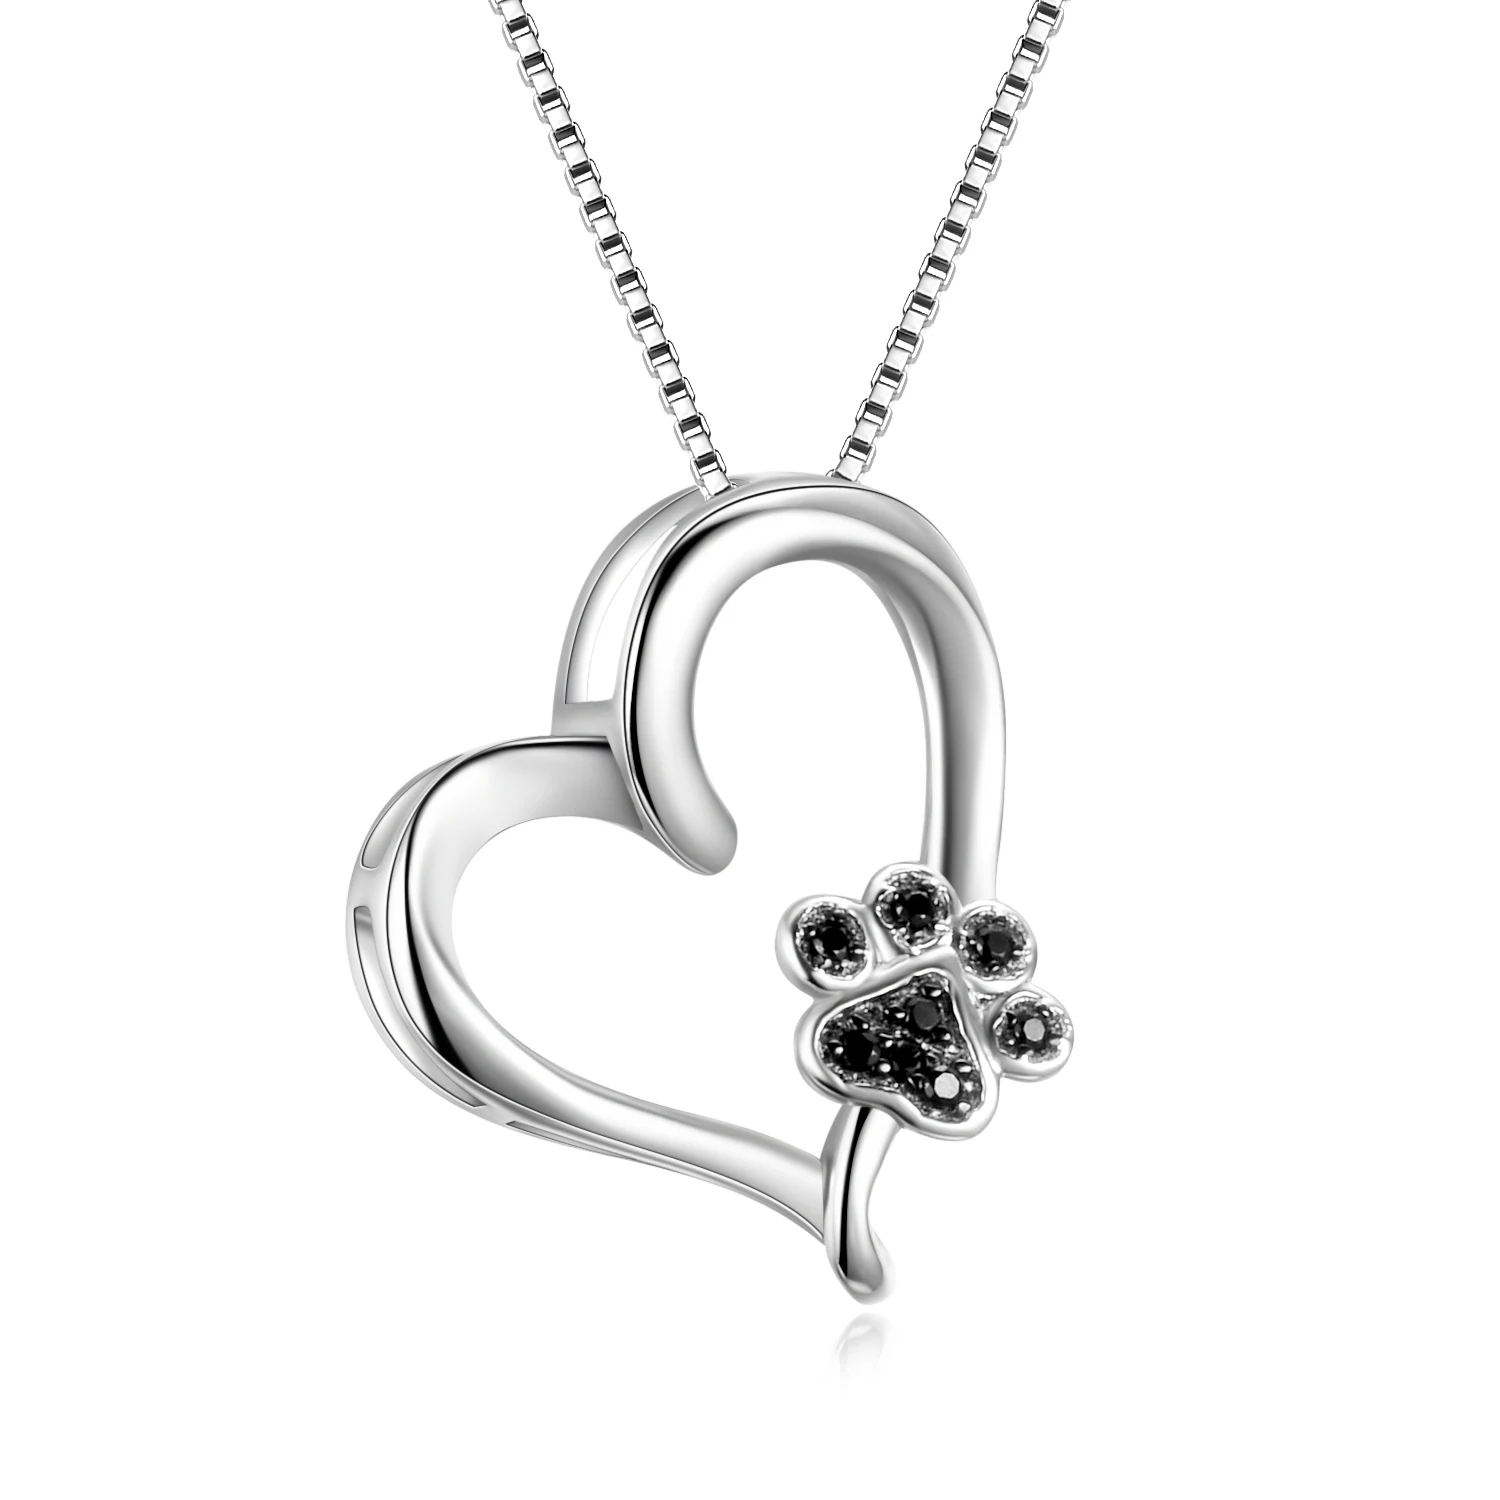 Dog Cat Pet Kitten Puppy Paw Print Heart Pendant Necklace Sterling Silver 